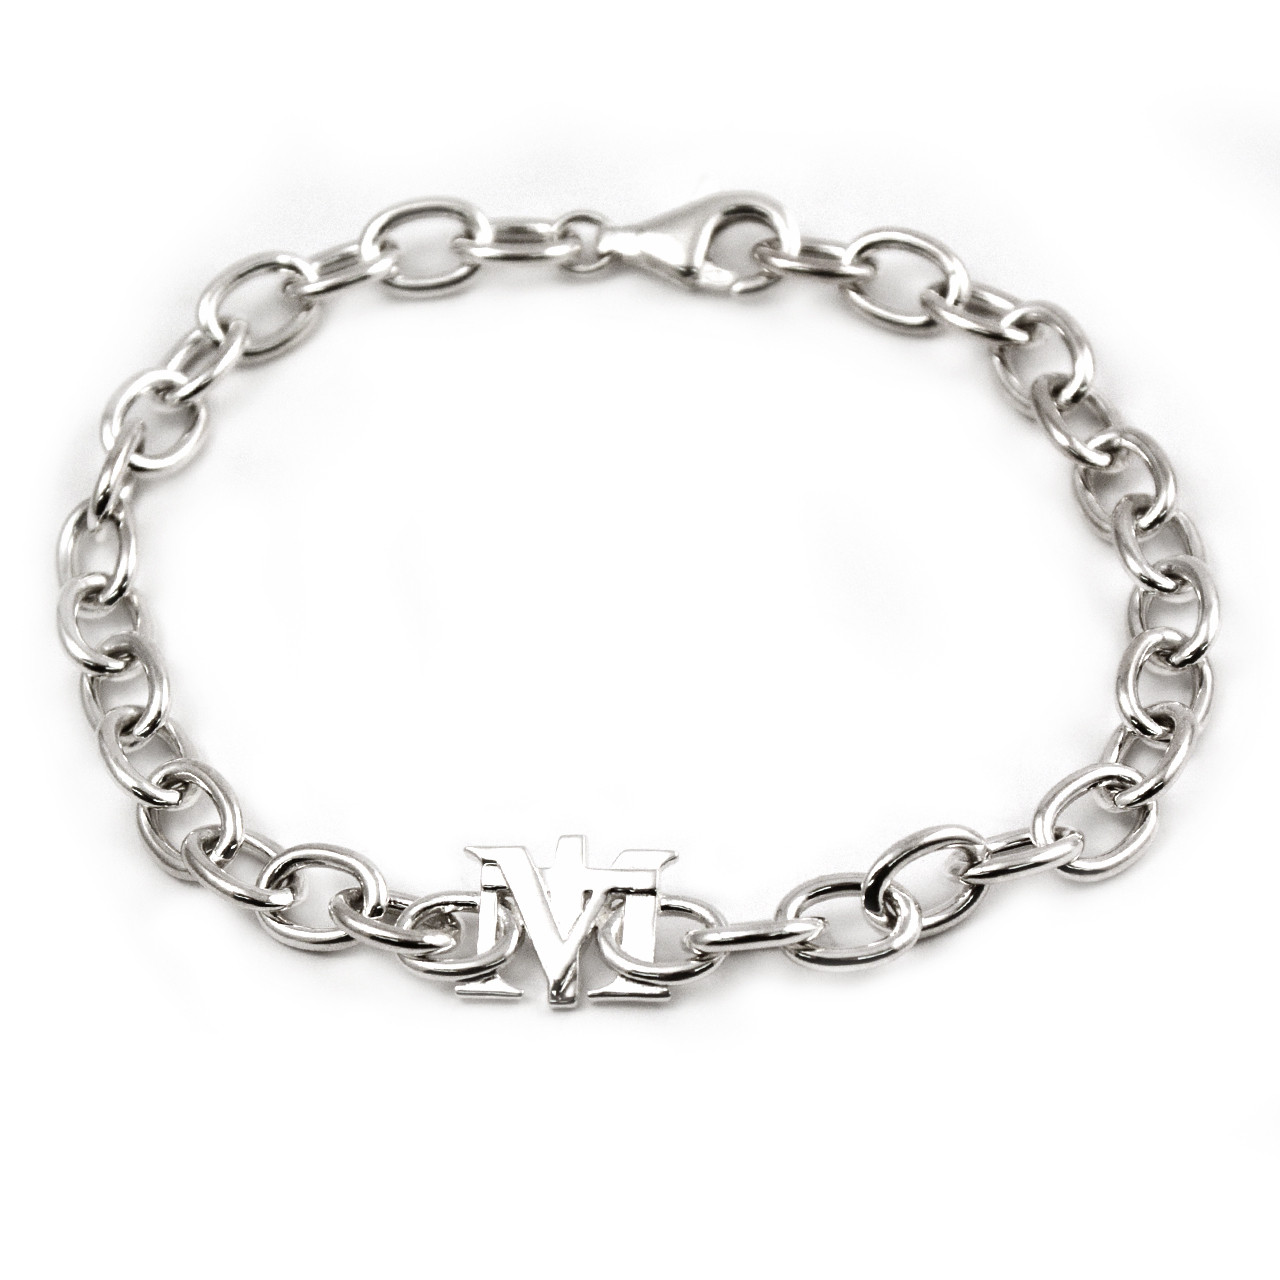 Louis Vuitton Mens Bracelets, Silver, M (Stock Confirmation Required)